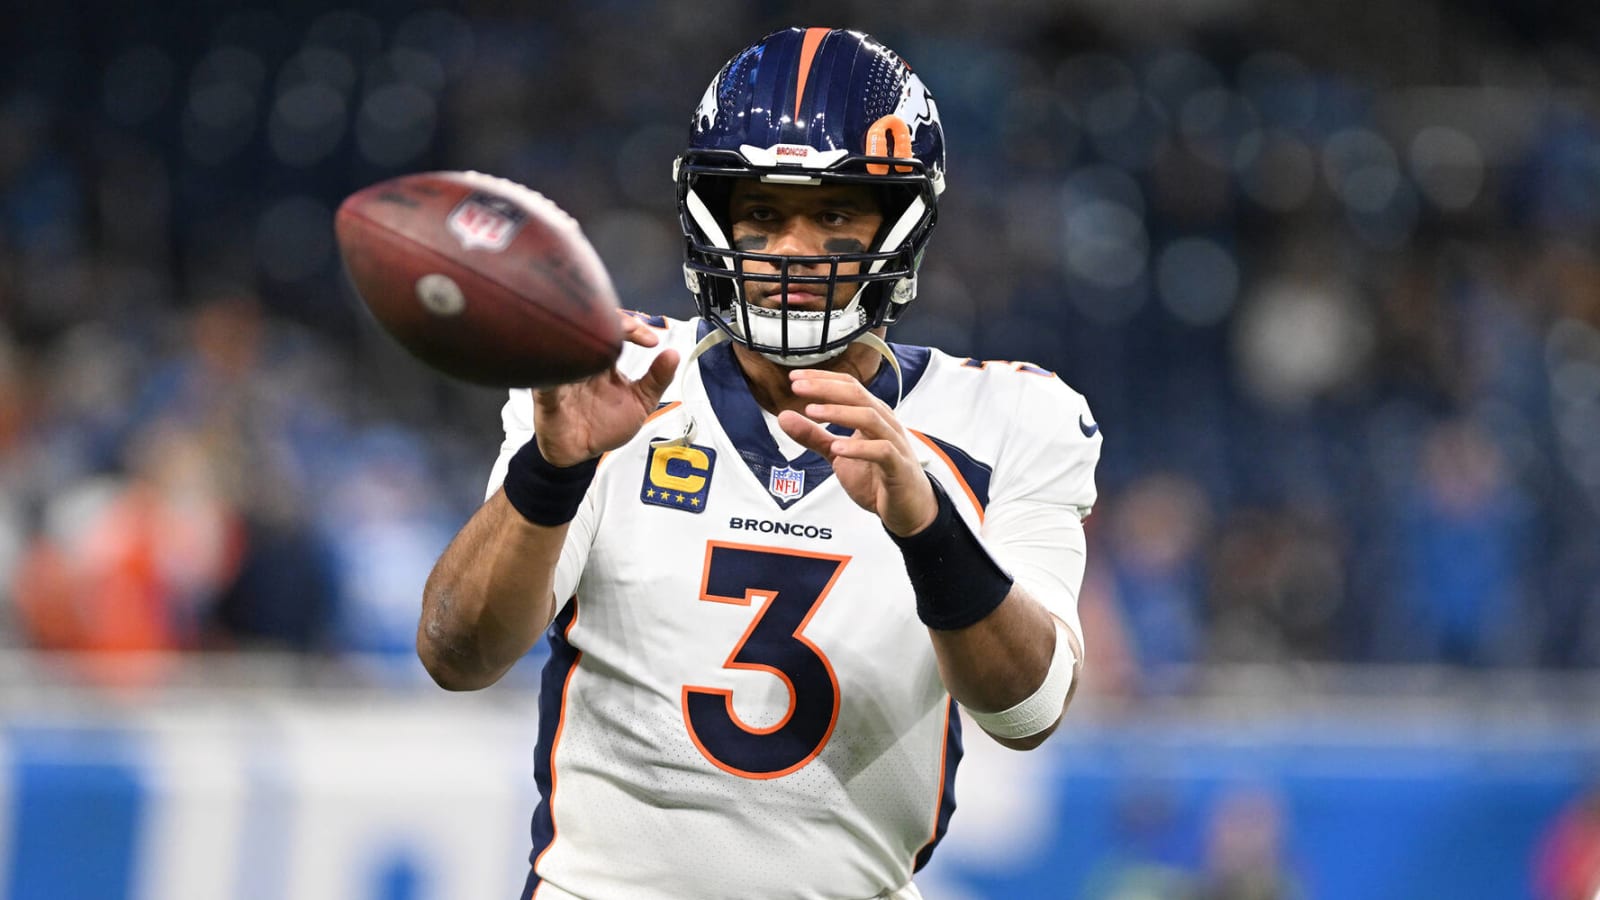 Broncos make drastic move with Russell Wilson